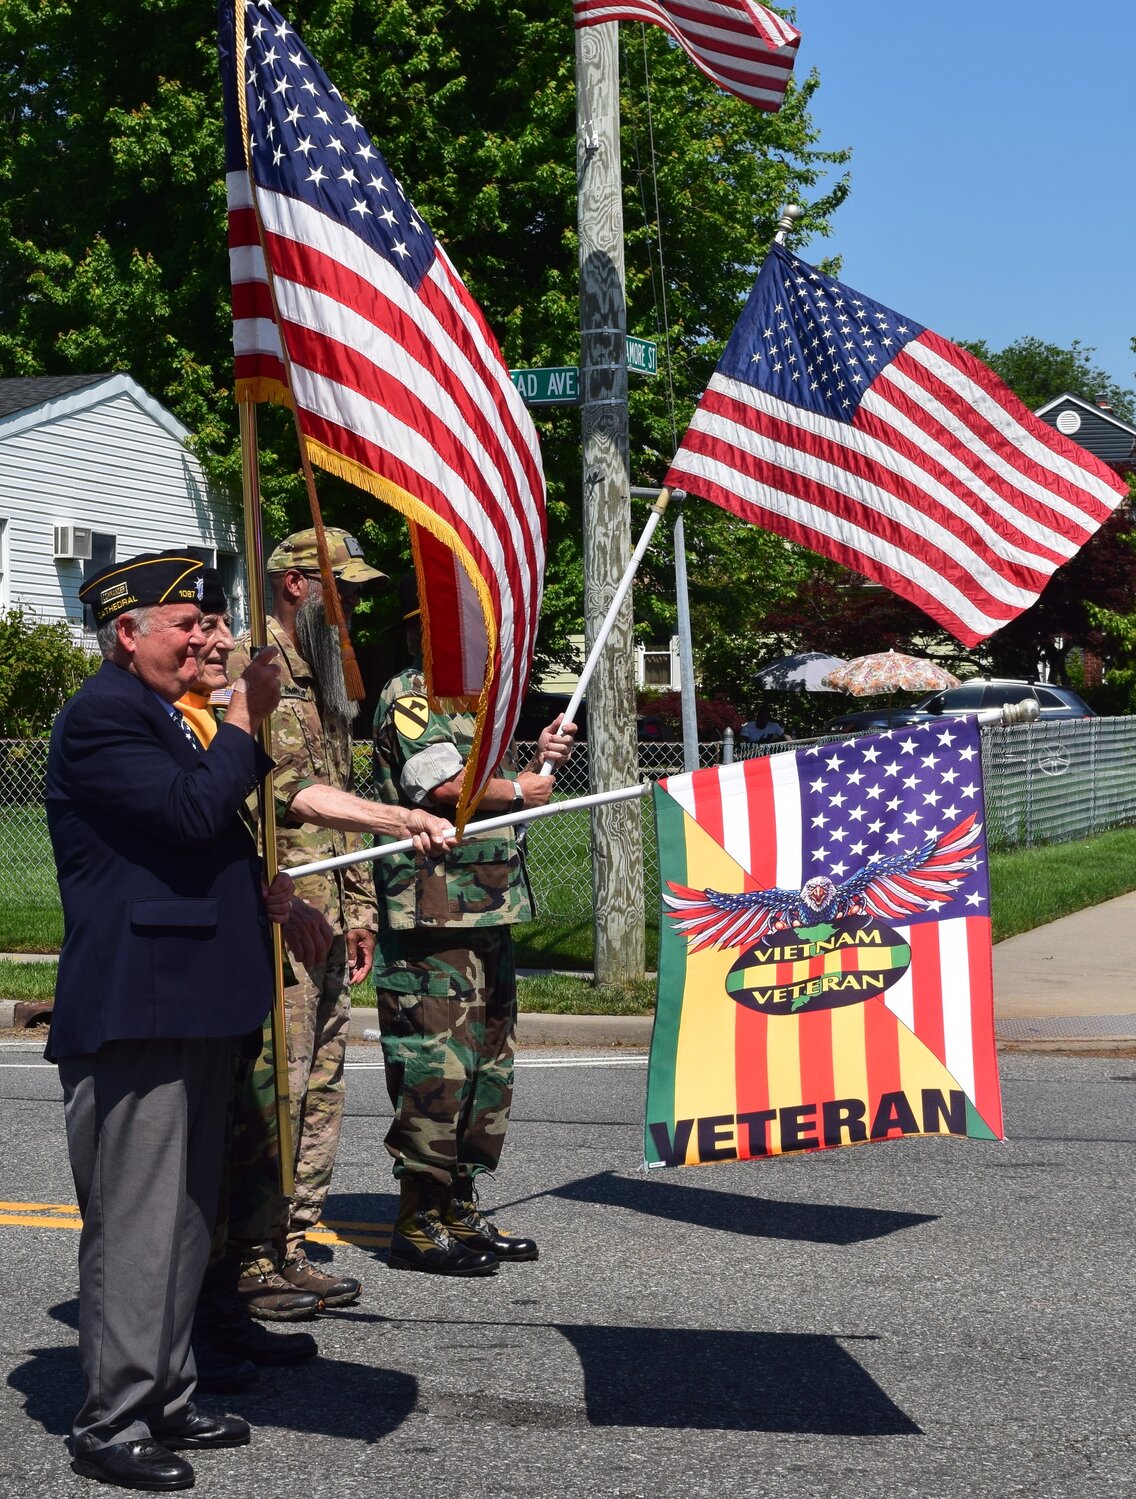 Support our veterans by attending a local Memorial Day parade.